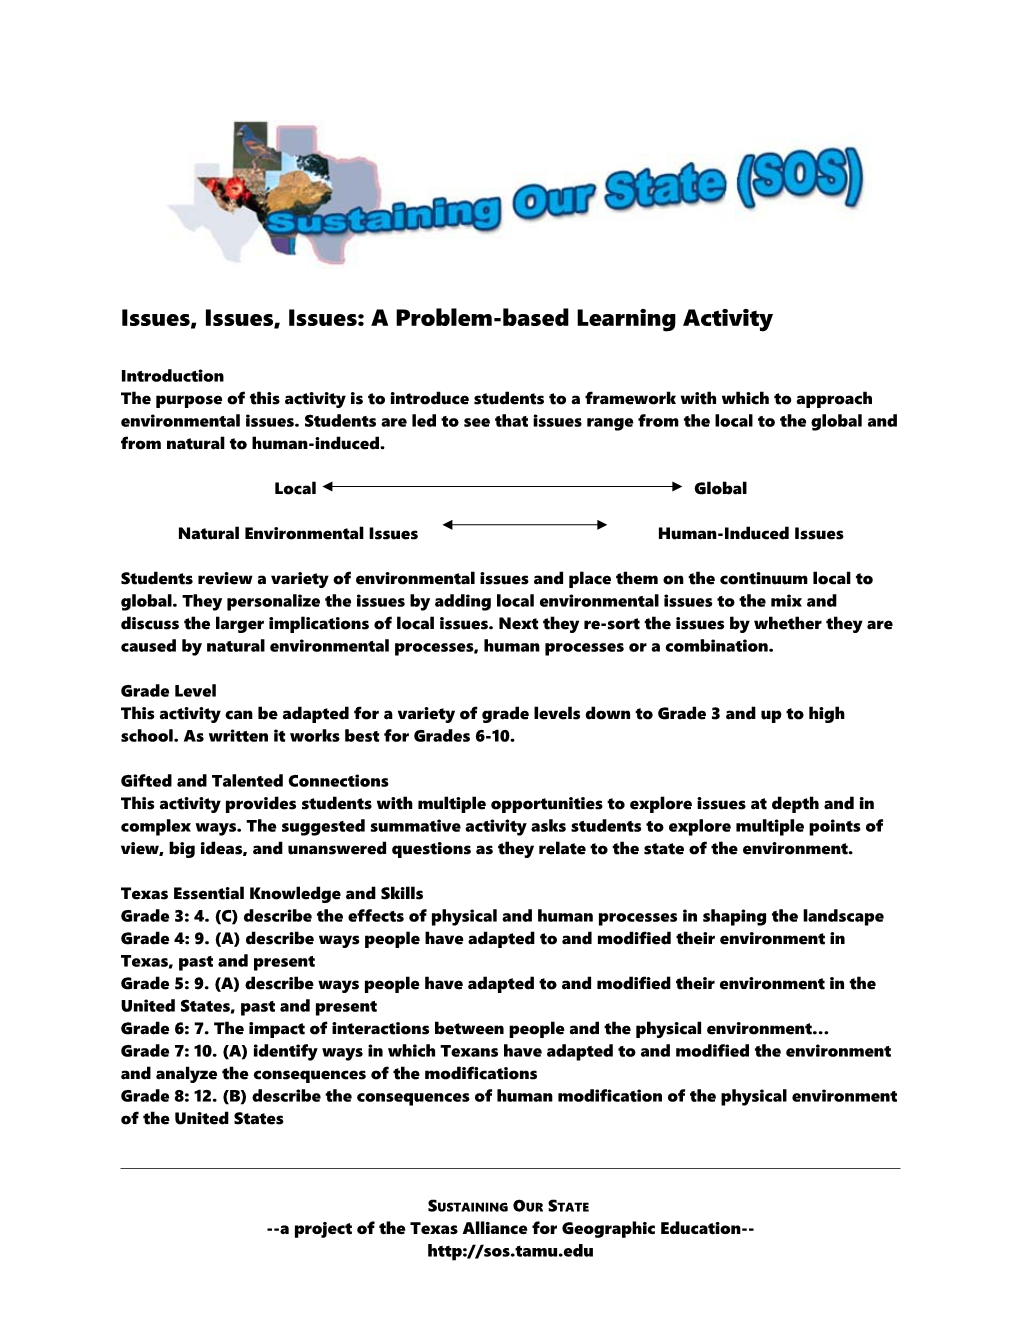 Issues, Issues, Issues: a Problem-Based Learning Activity